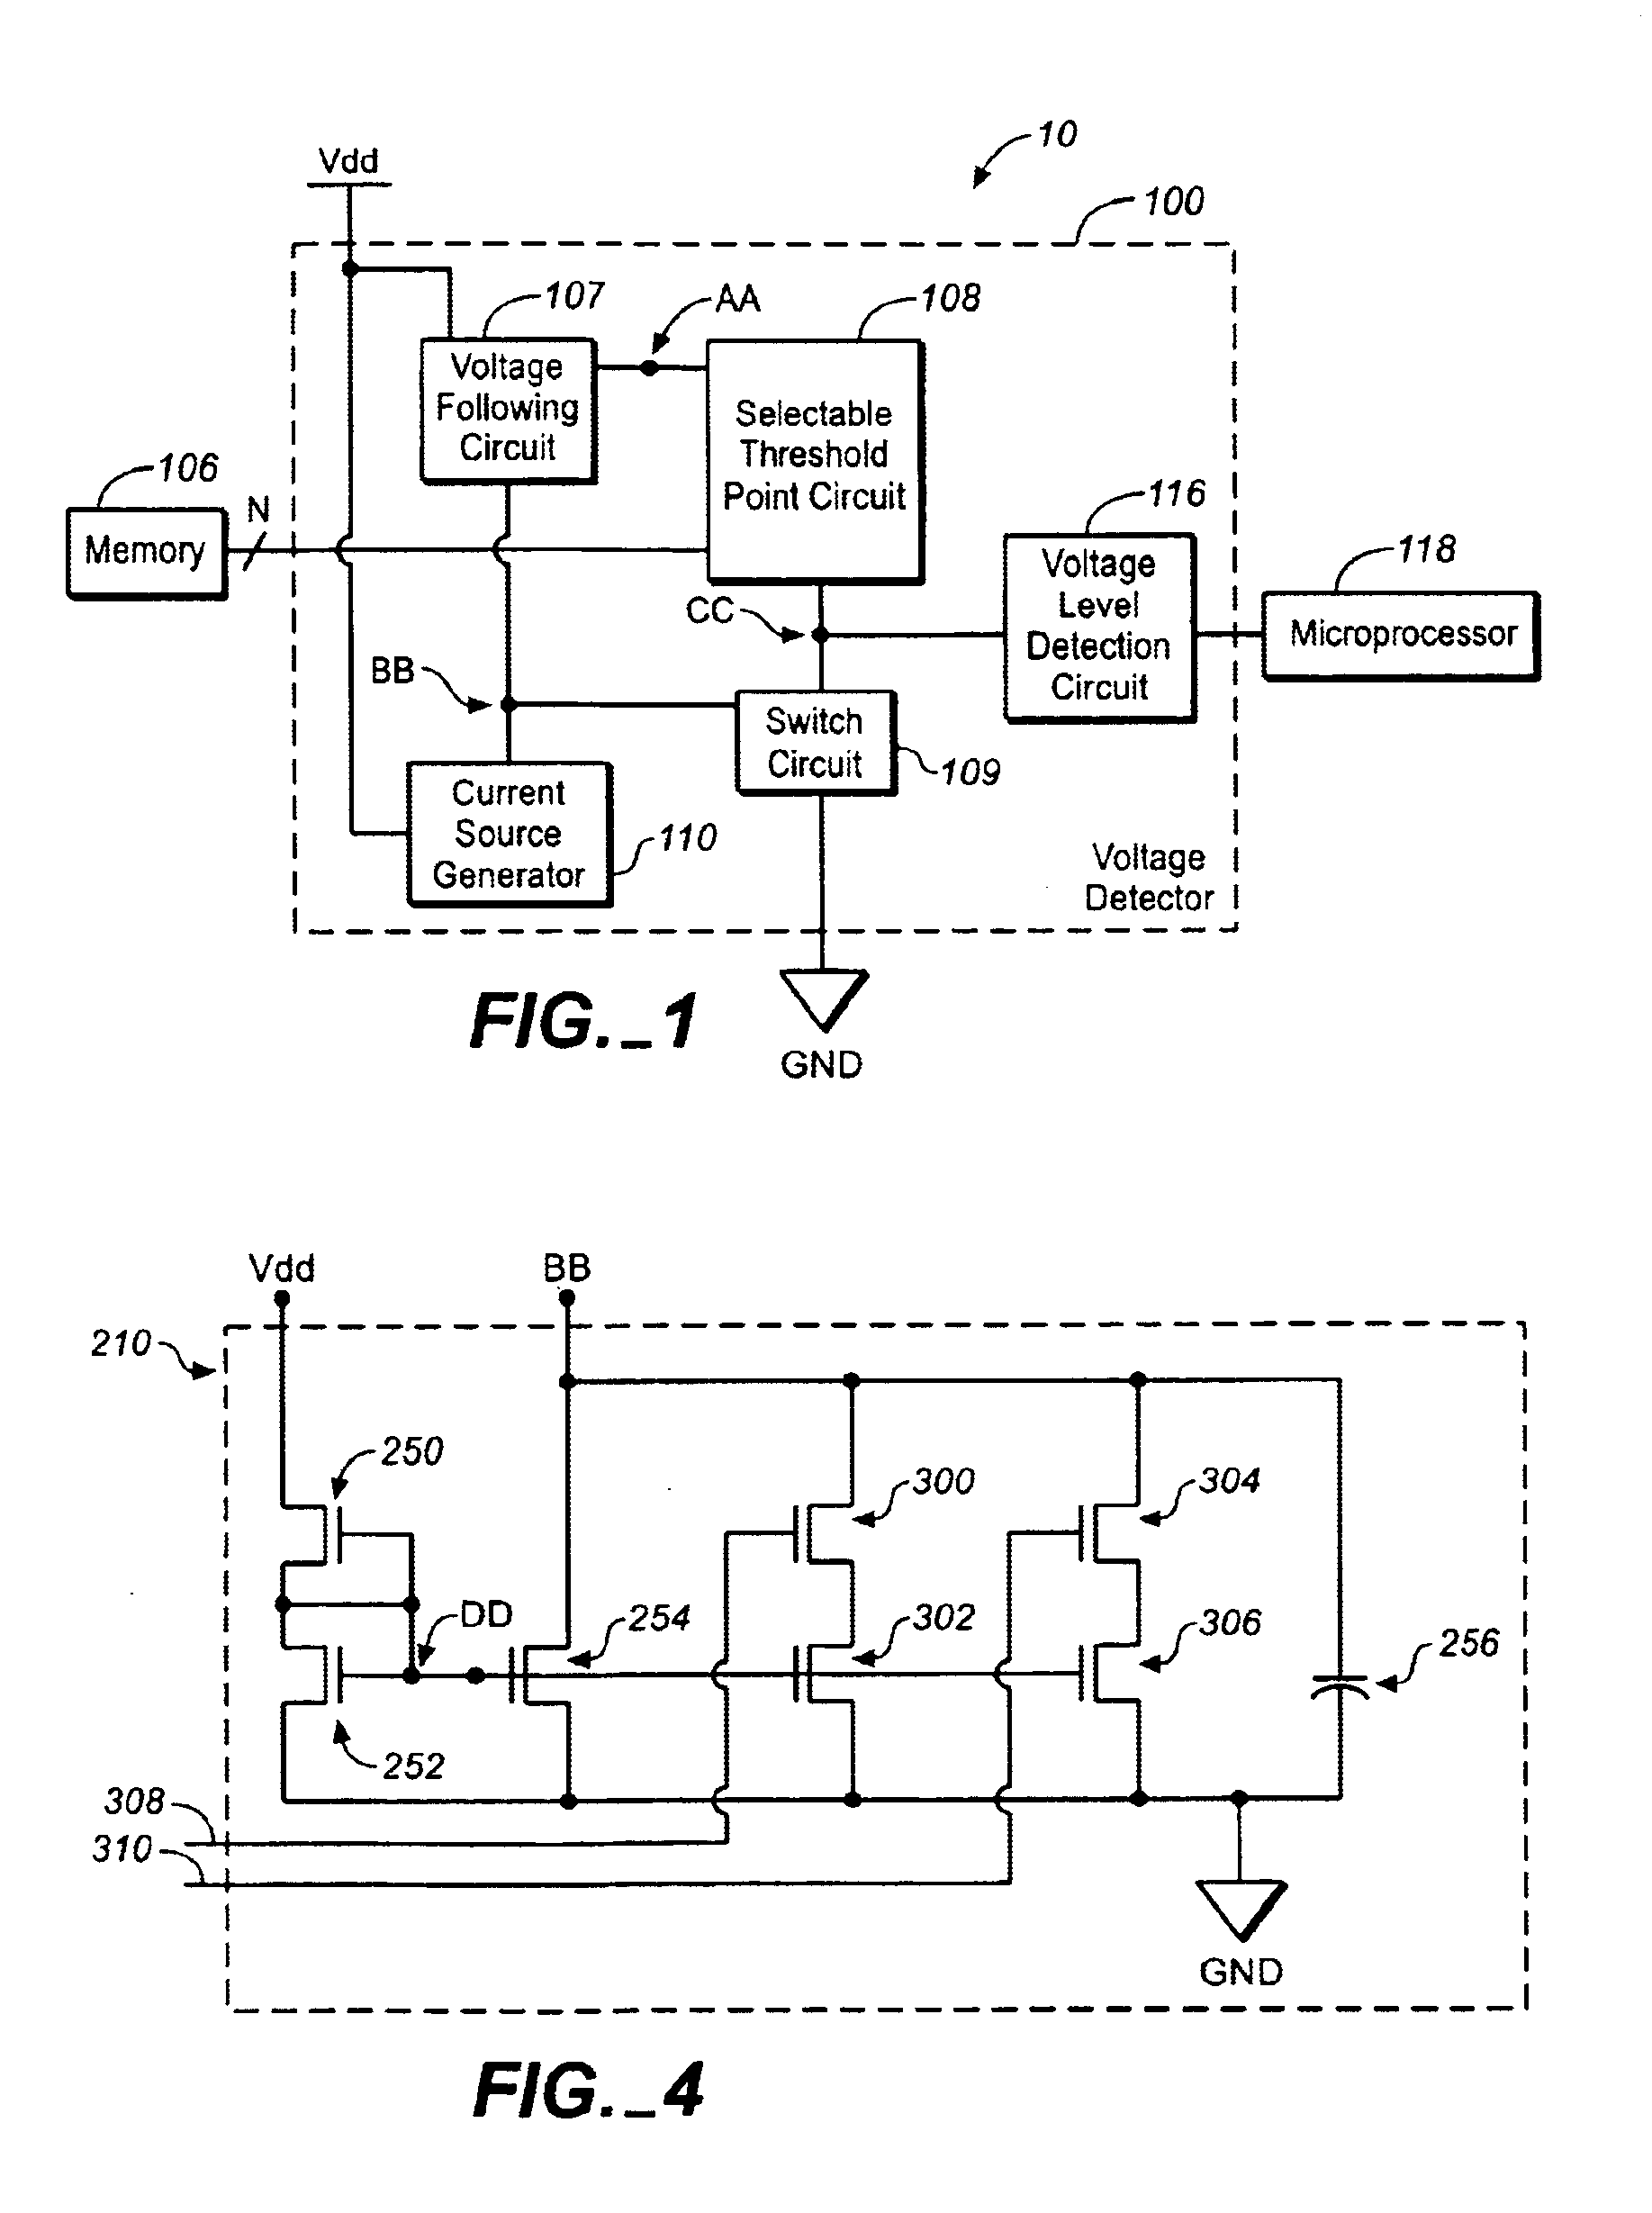 Voltage detector circuit with a programmable threshold point